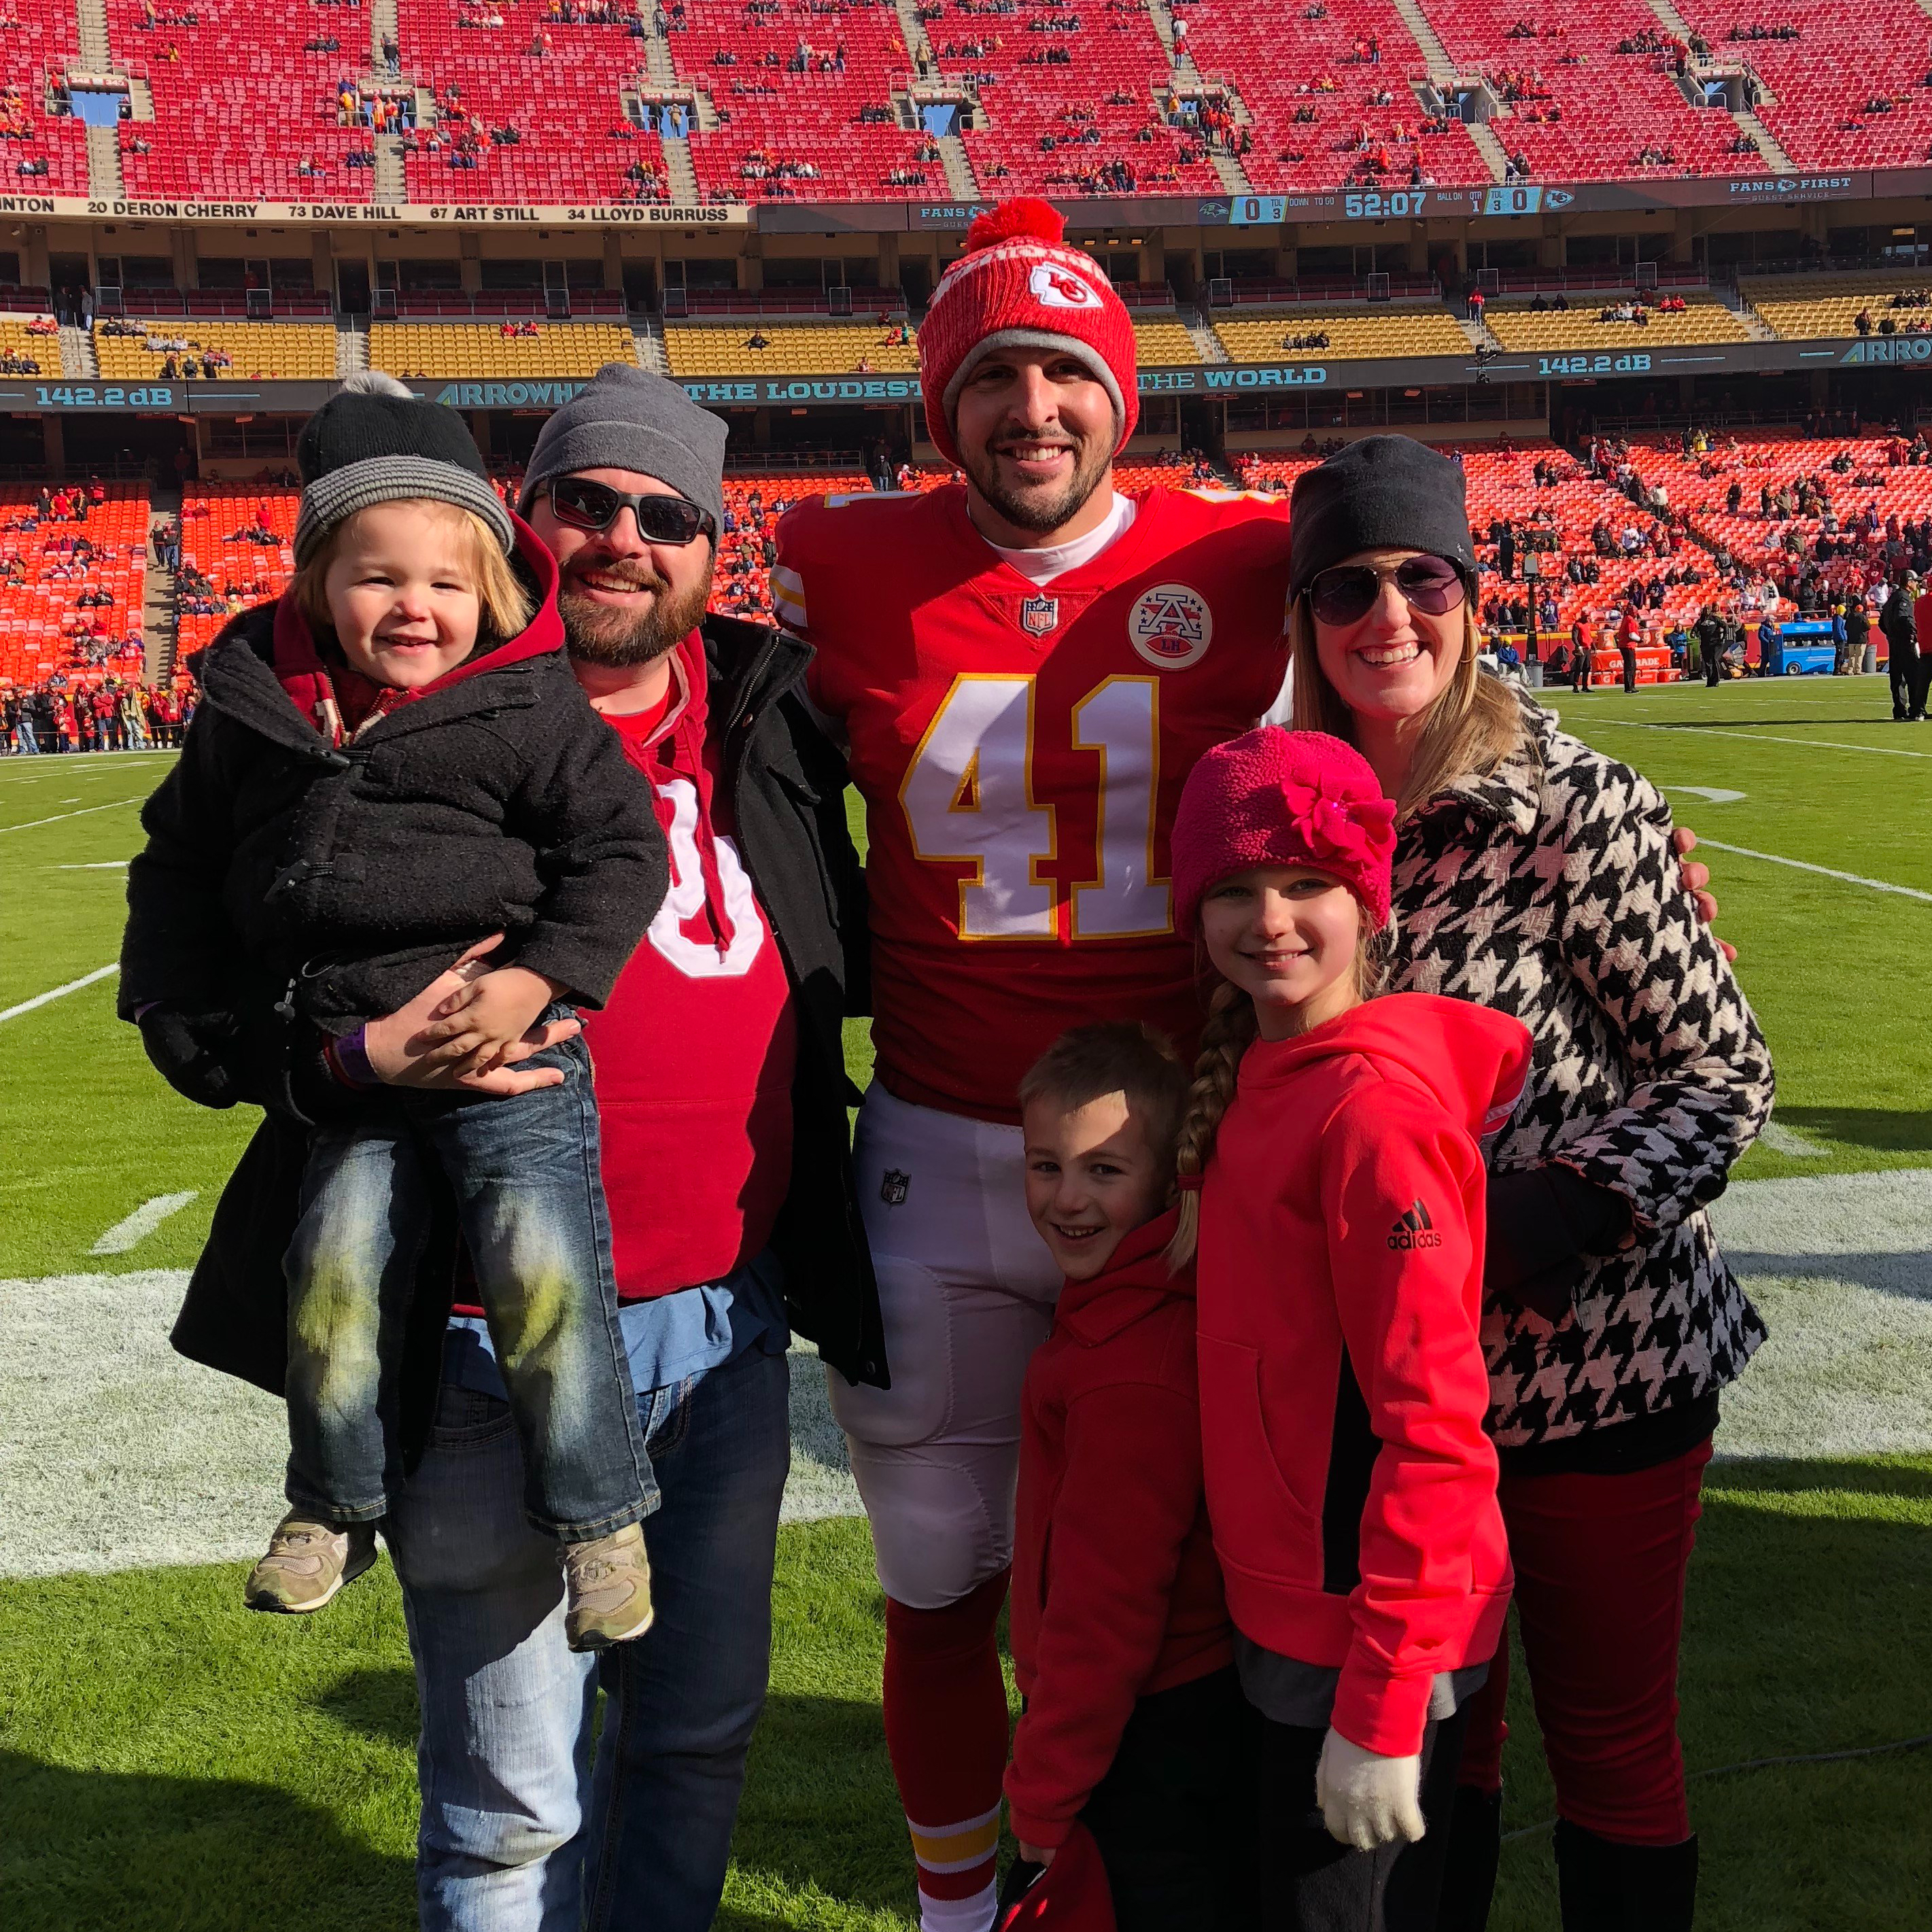 Michael and family with Kansas City Chiefs long snapper, James Winchester. Sidelines at Arrowhead Stadium in Kansas City.